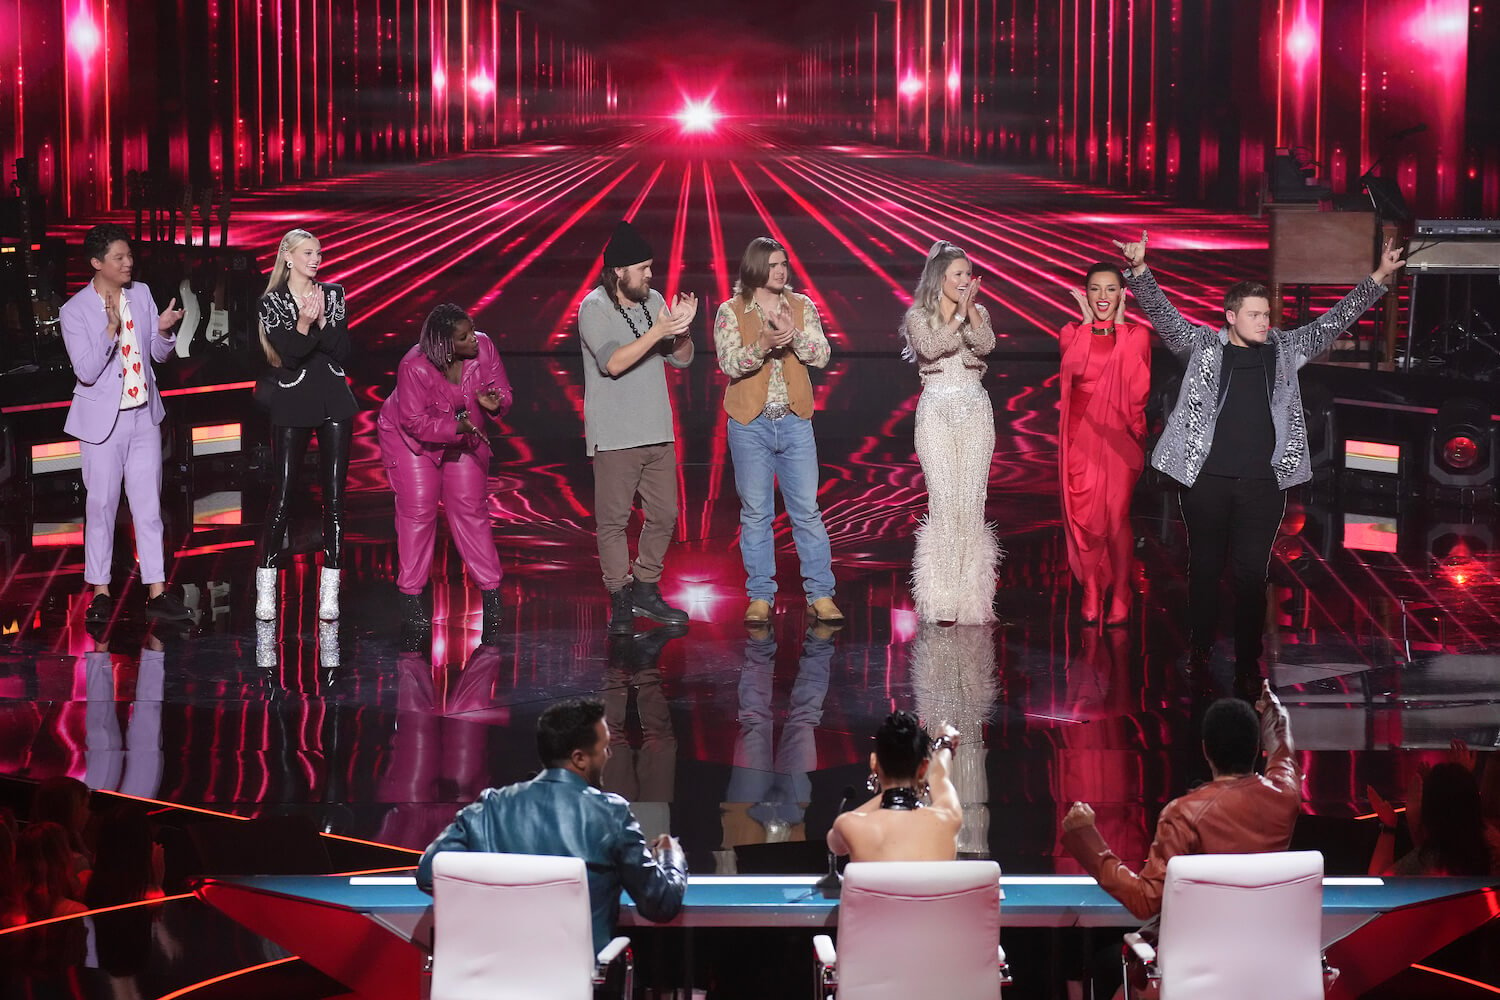 The 'American Idol' 2023 top 10 contestants on stage against pink lighting